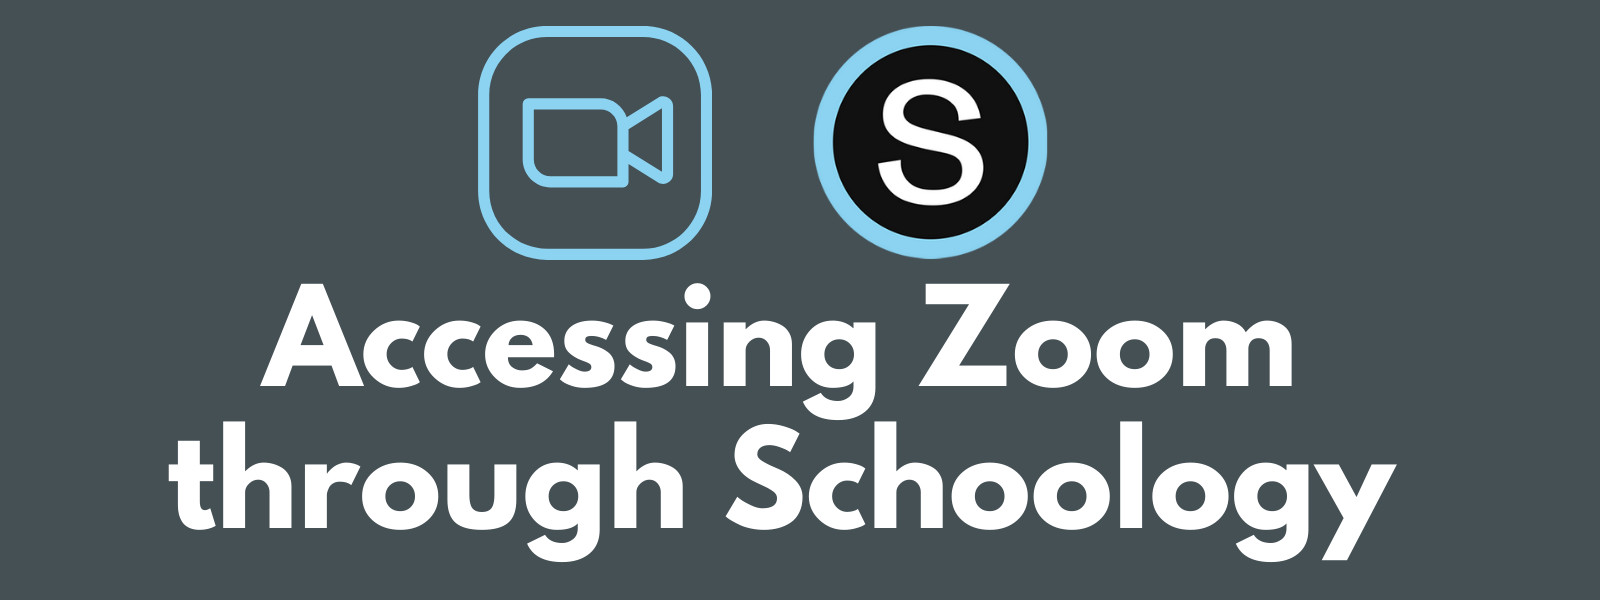 Schoology and Zoom